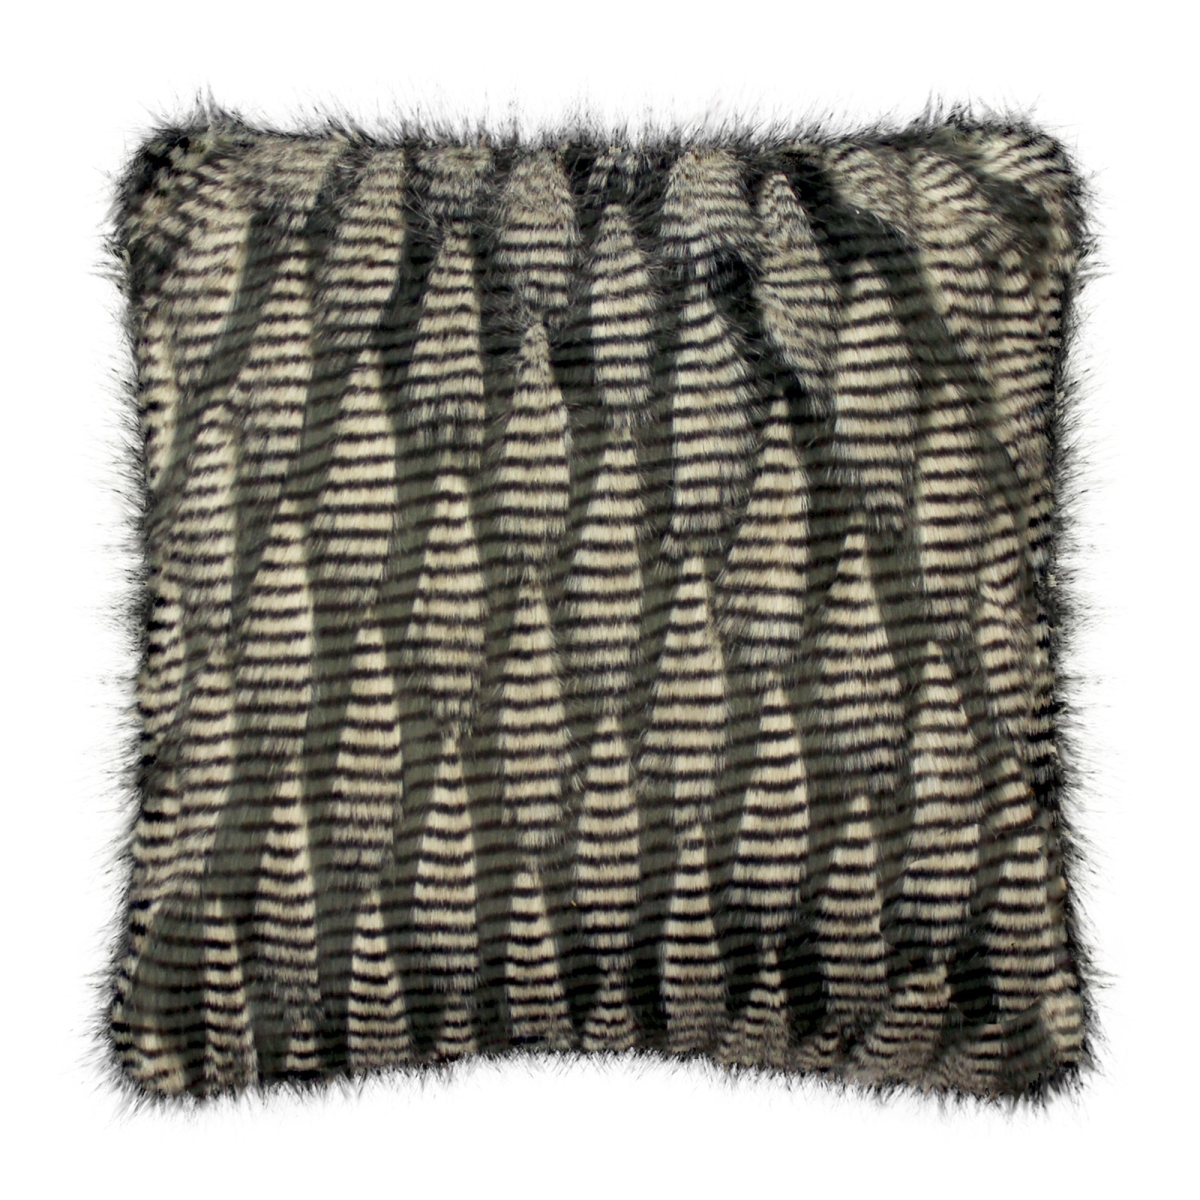 18 X 18 In. Jacquard Faux Fur Throw Pillow Cover